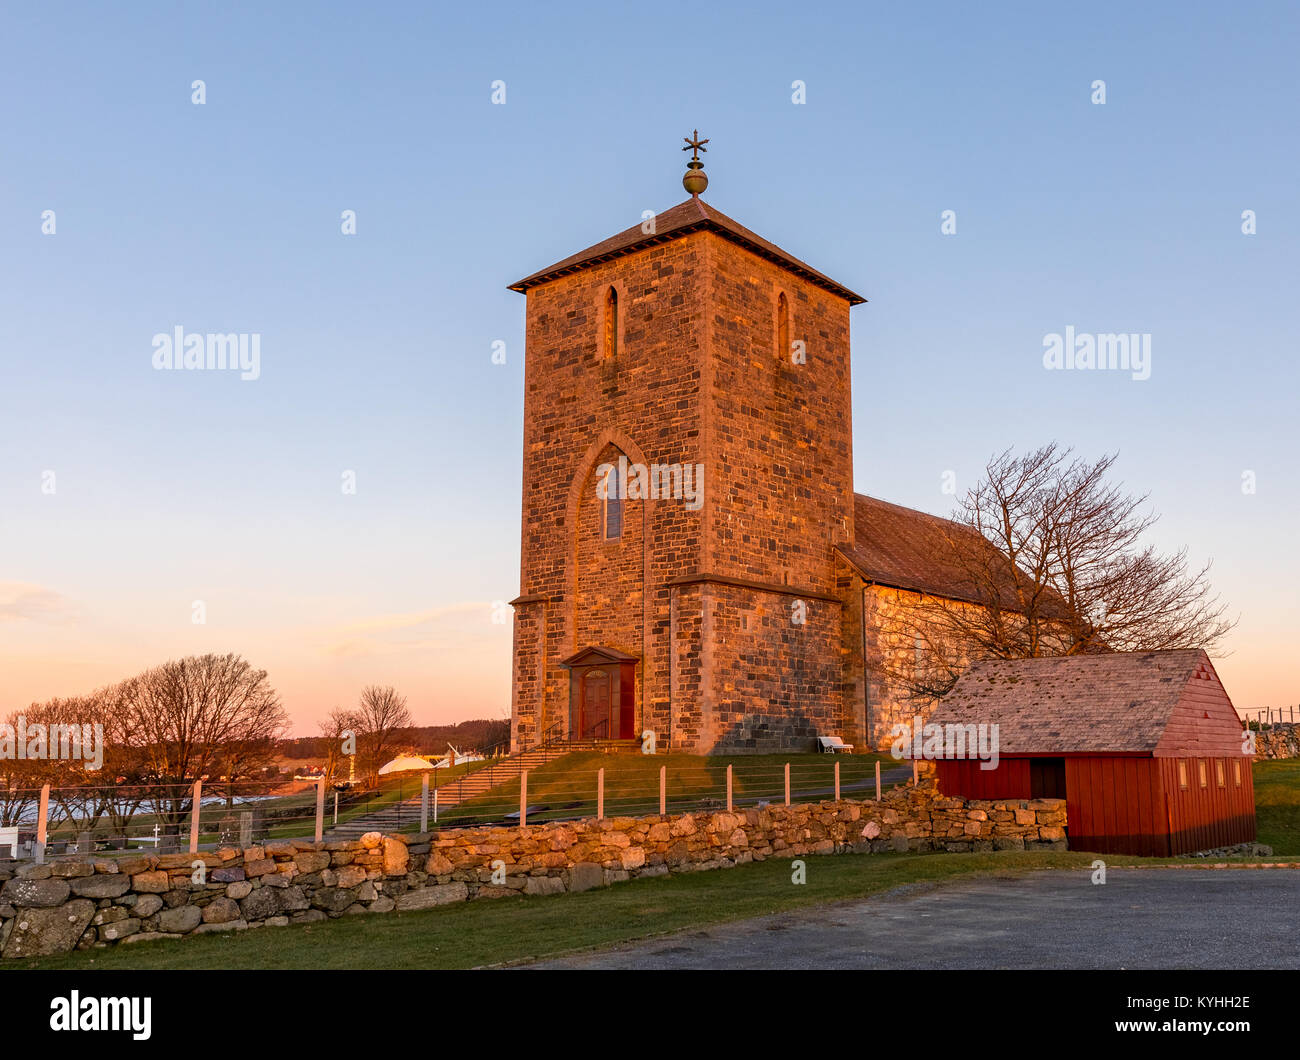 The medieval stone church at Avaldsnes, on the Island of Karmoy, Norway, vertical image of the front entrance and stairs Stock Photo